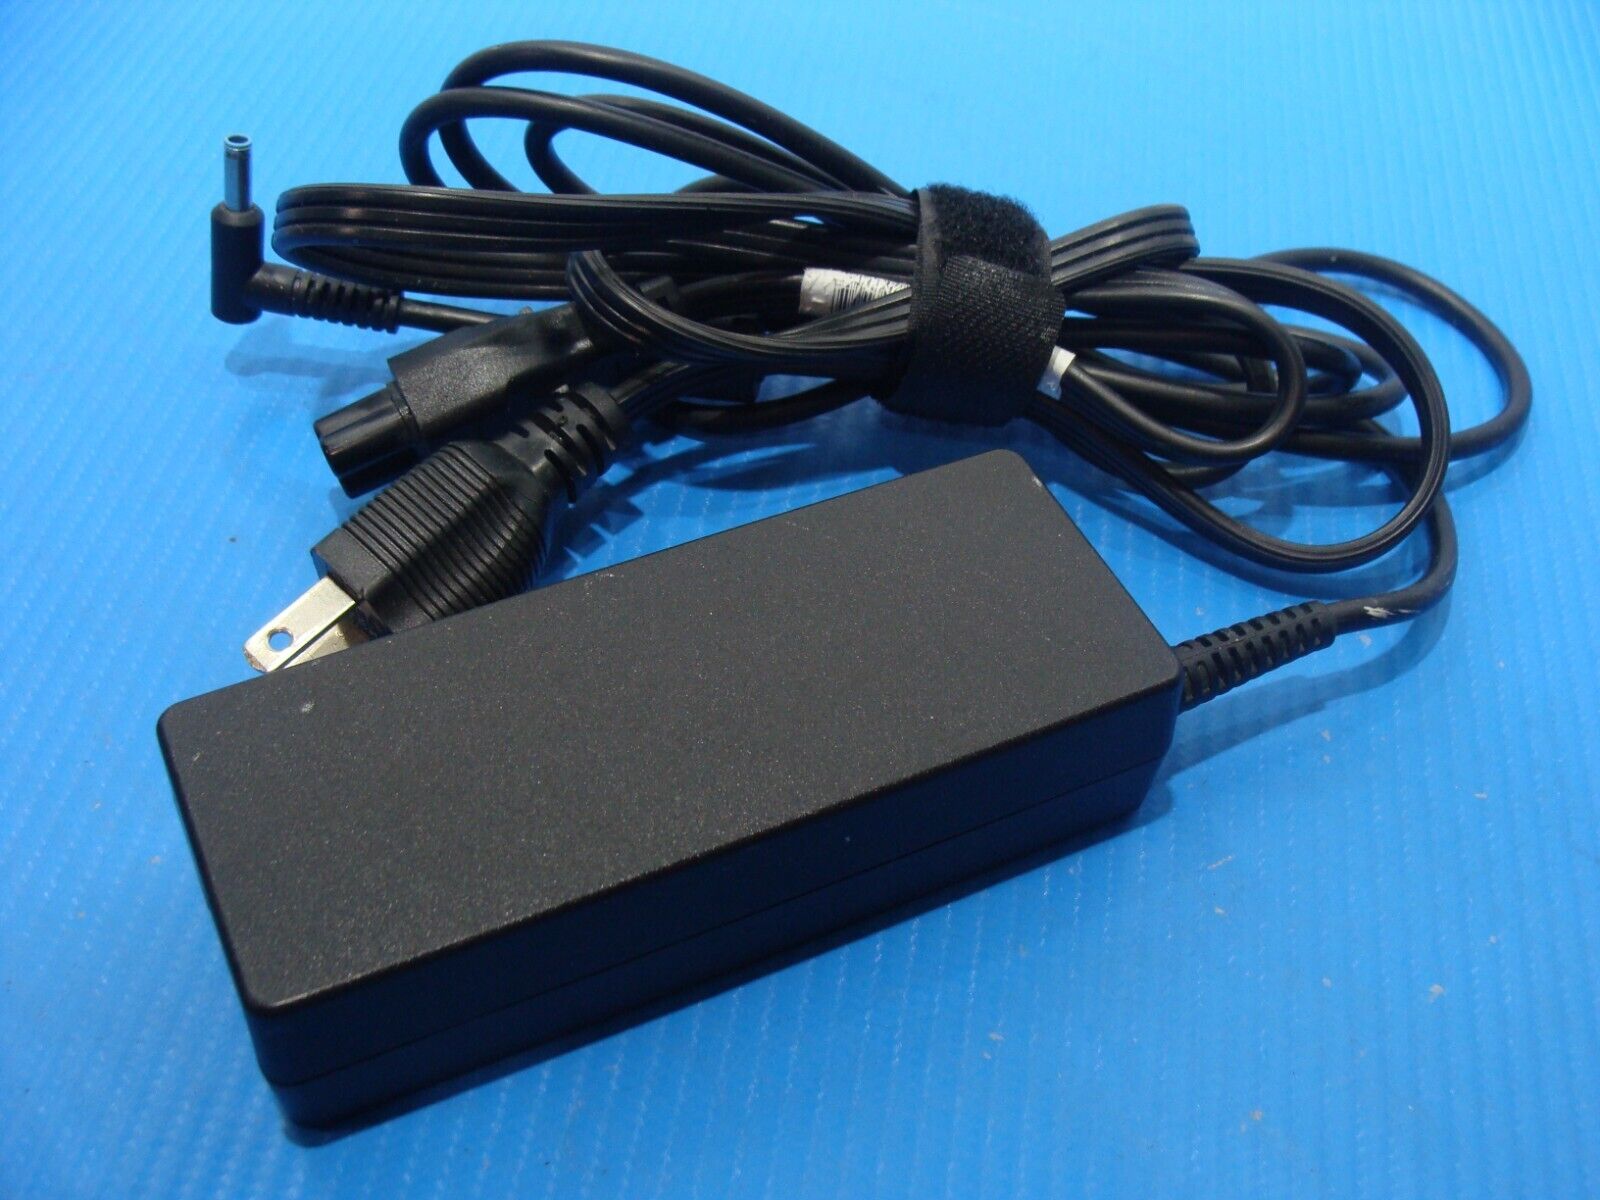 OEM 90W 19.5V 4.62A for HP AC Charger 709986-003 753560-004 710413-001 Blue Tip